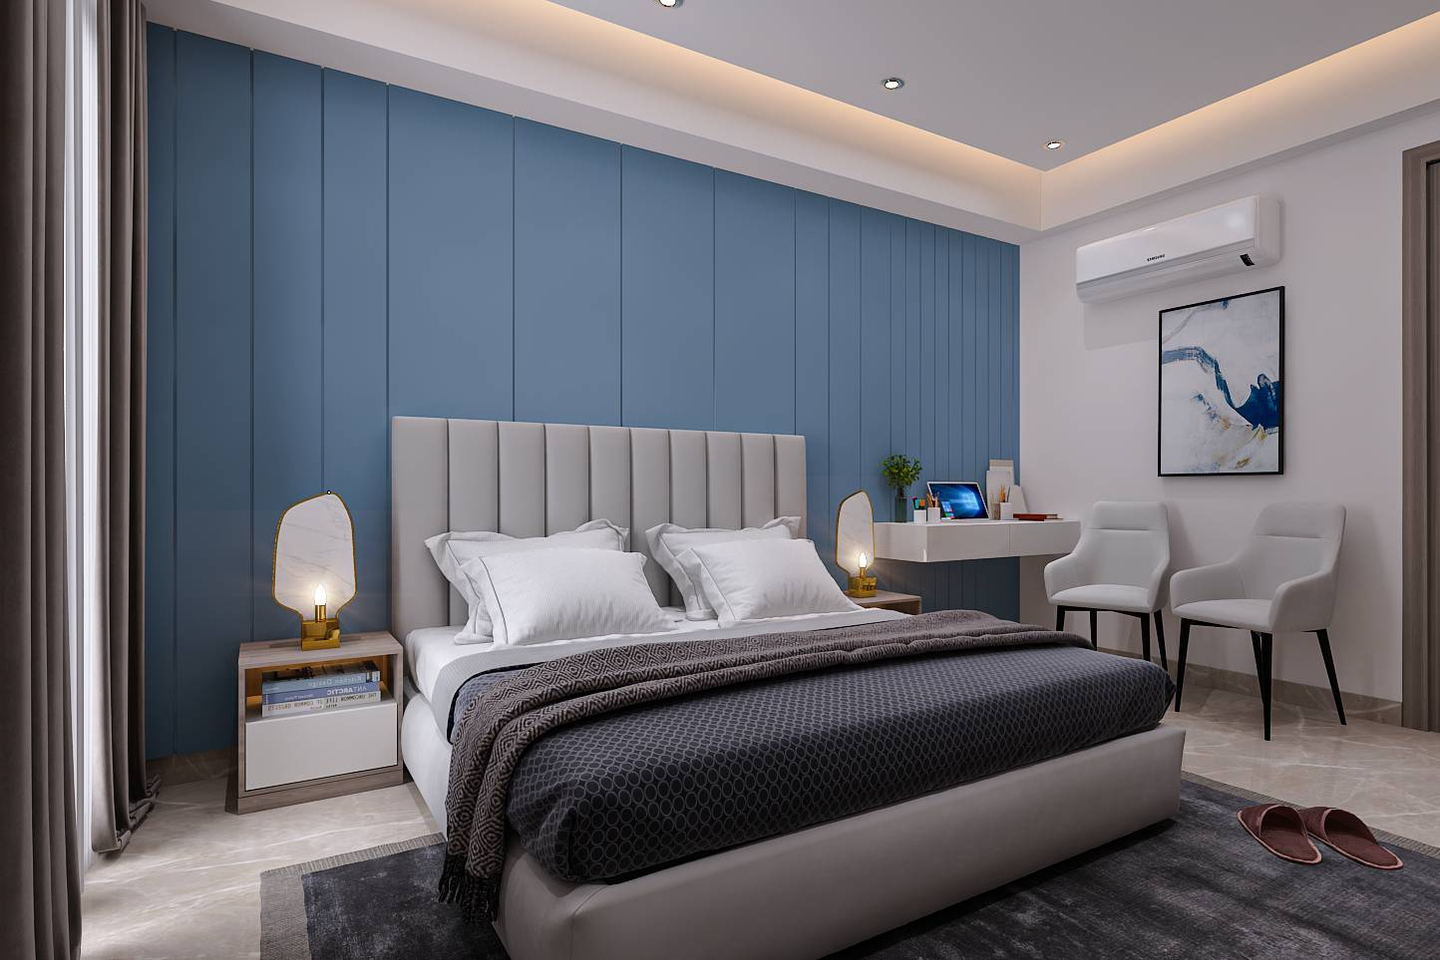 Guest Bedroom Design With Blue Accent Wall - Livspace